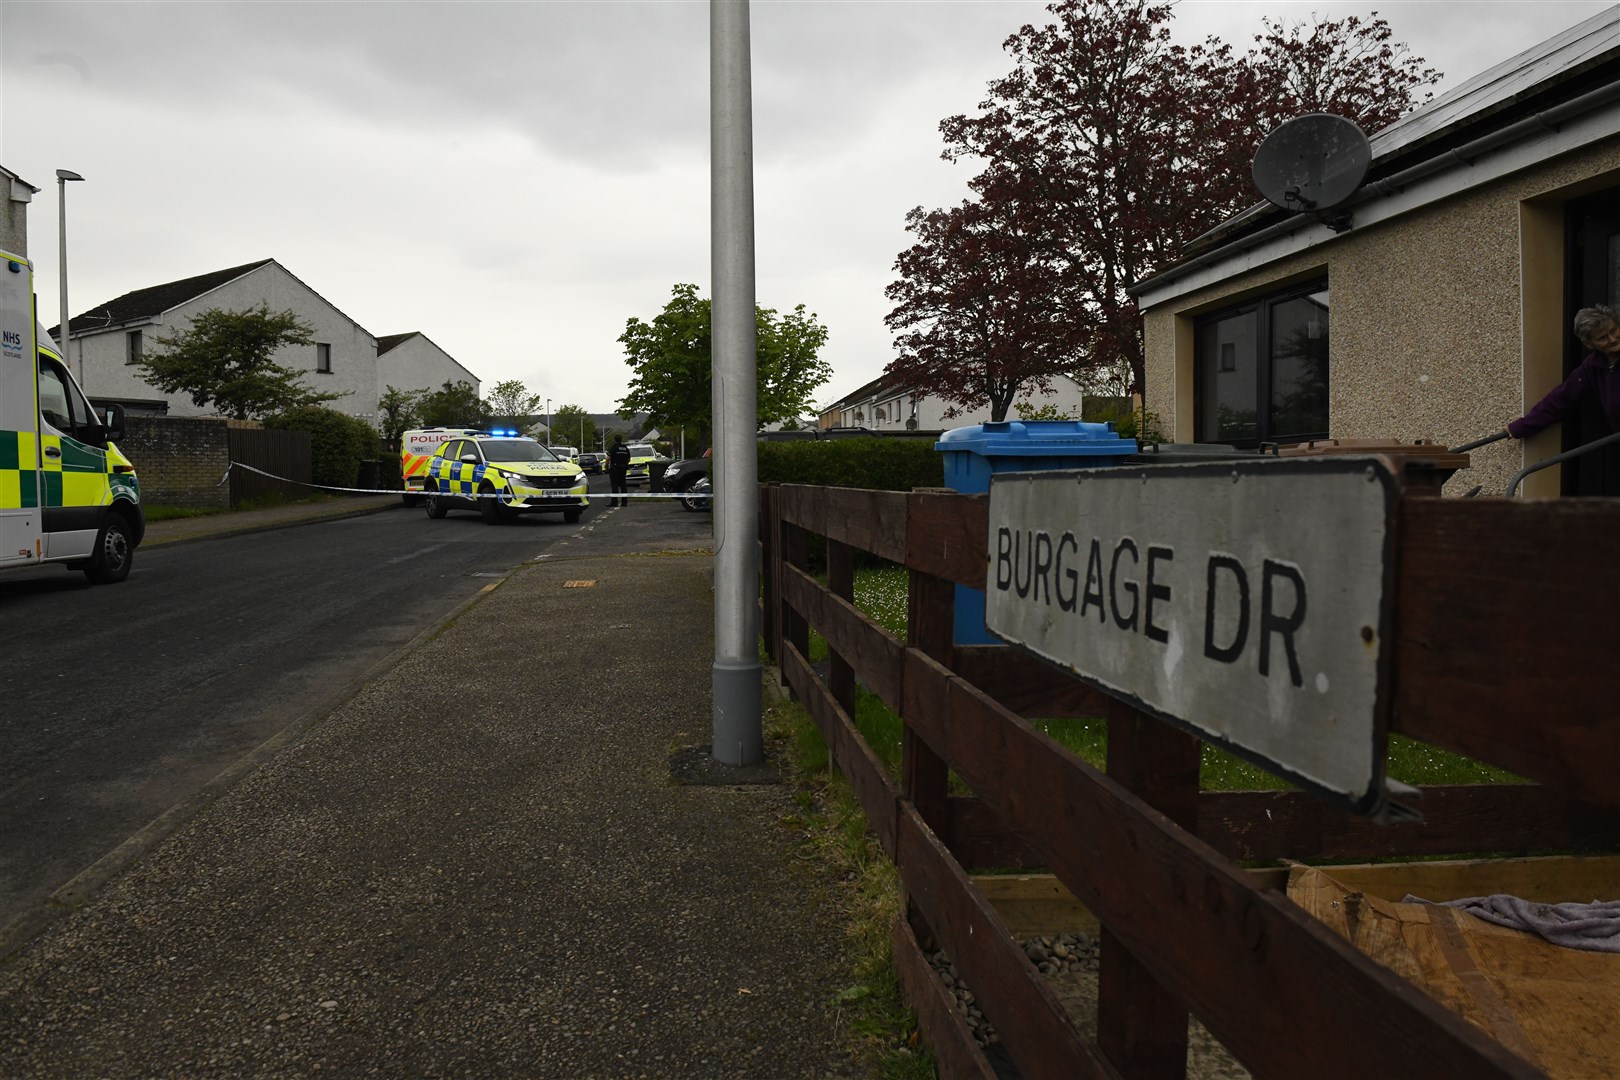 Police said they had made an arrest following a reported disturbance in the Burgage Drive area.